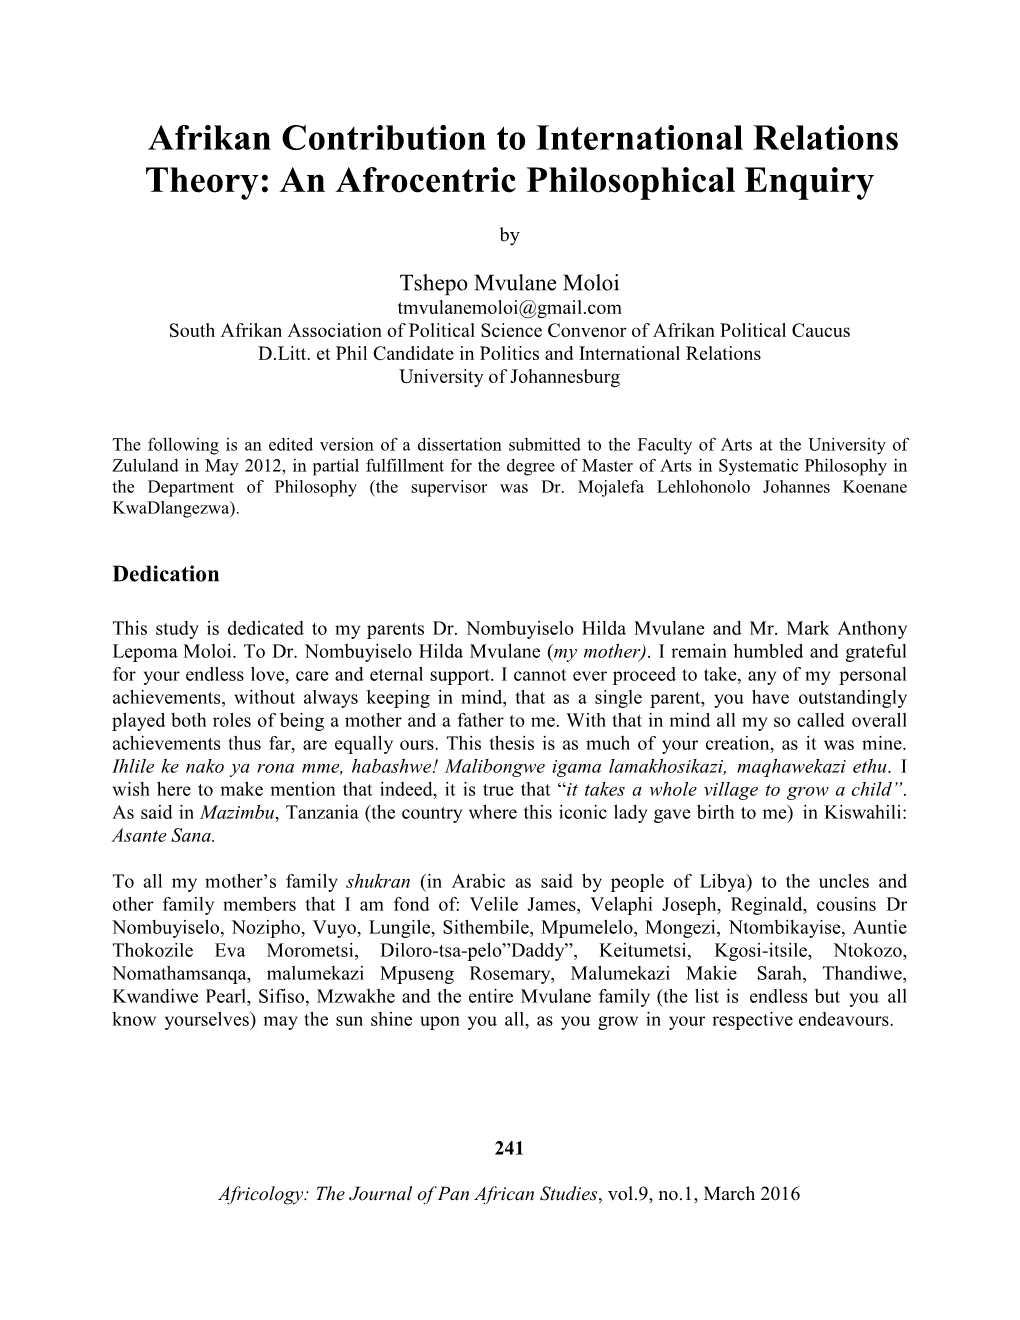 An Afrocentric Philosophical Enquiry